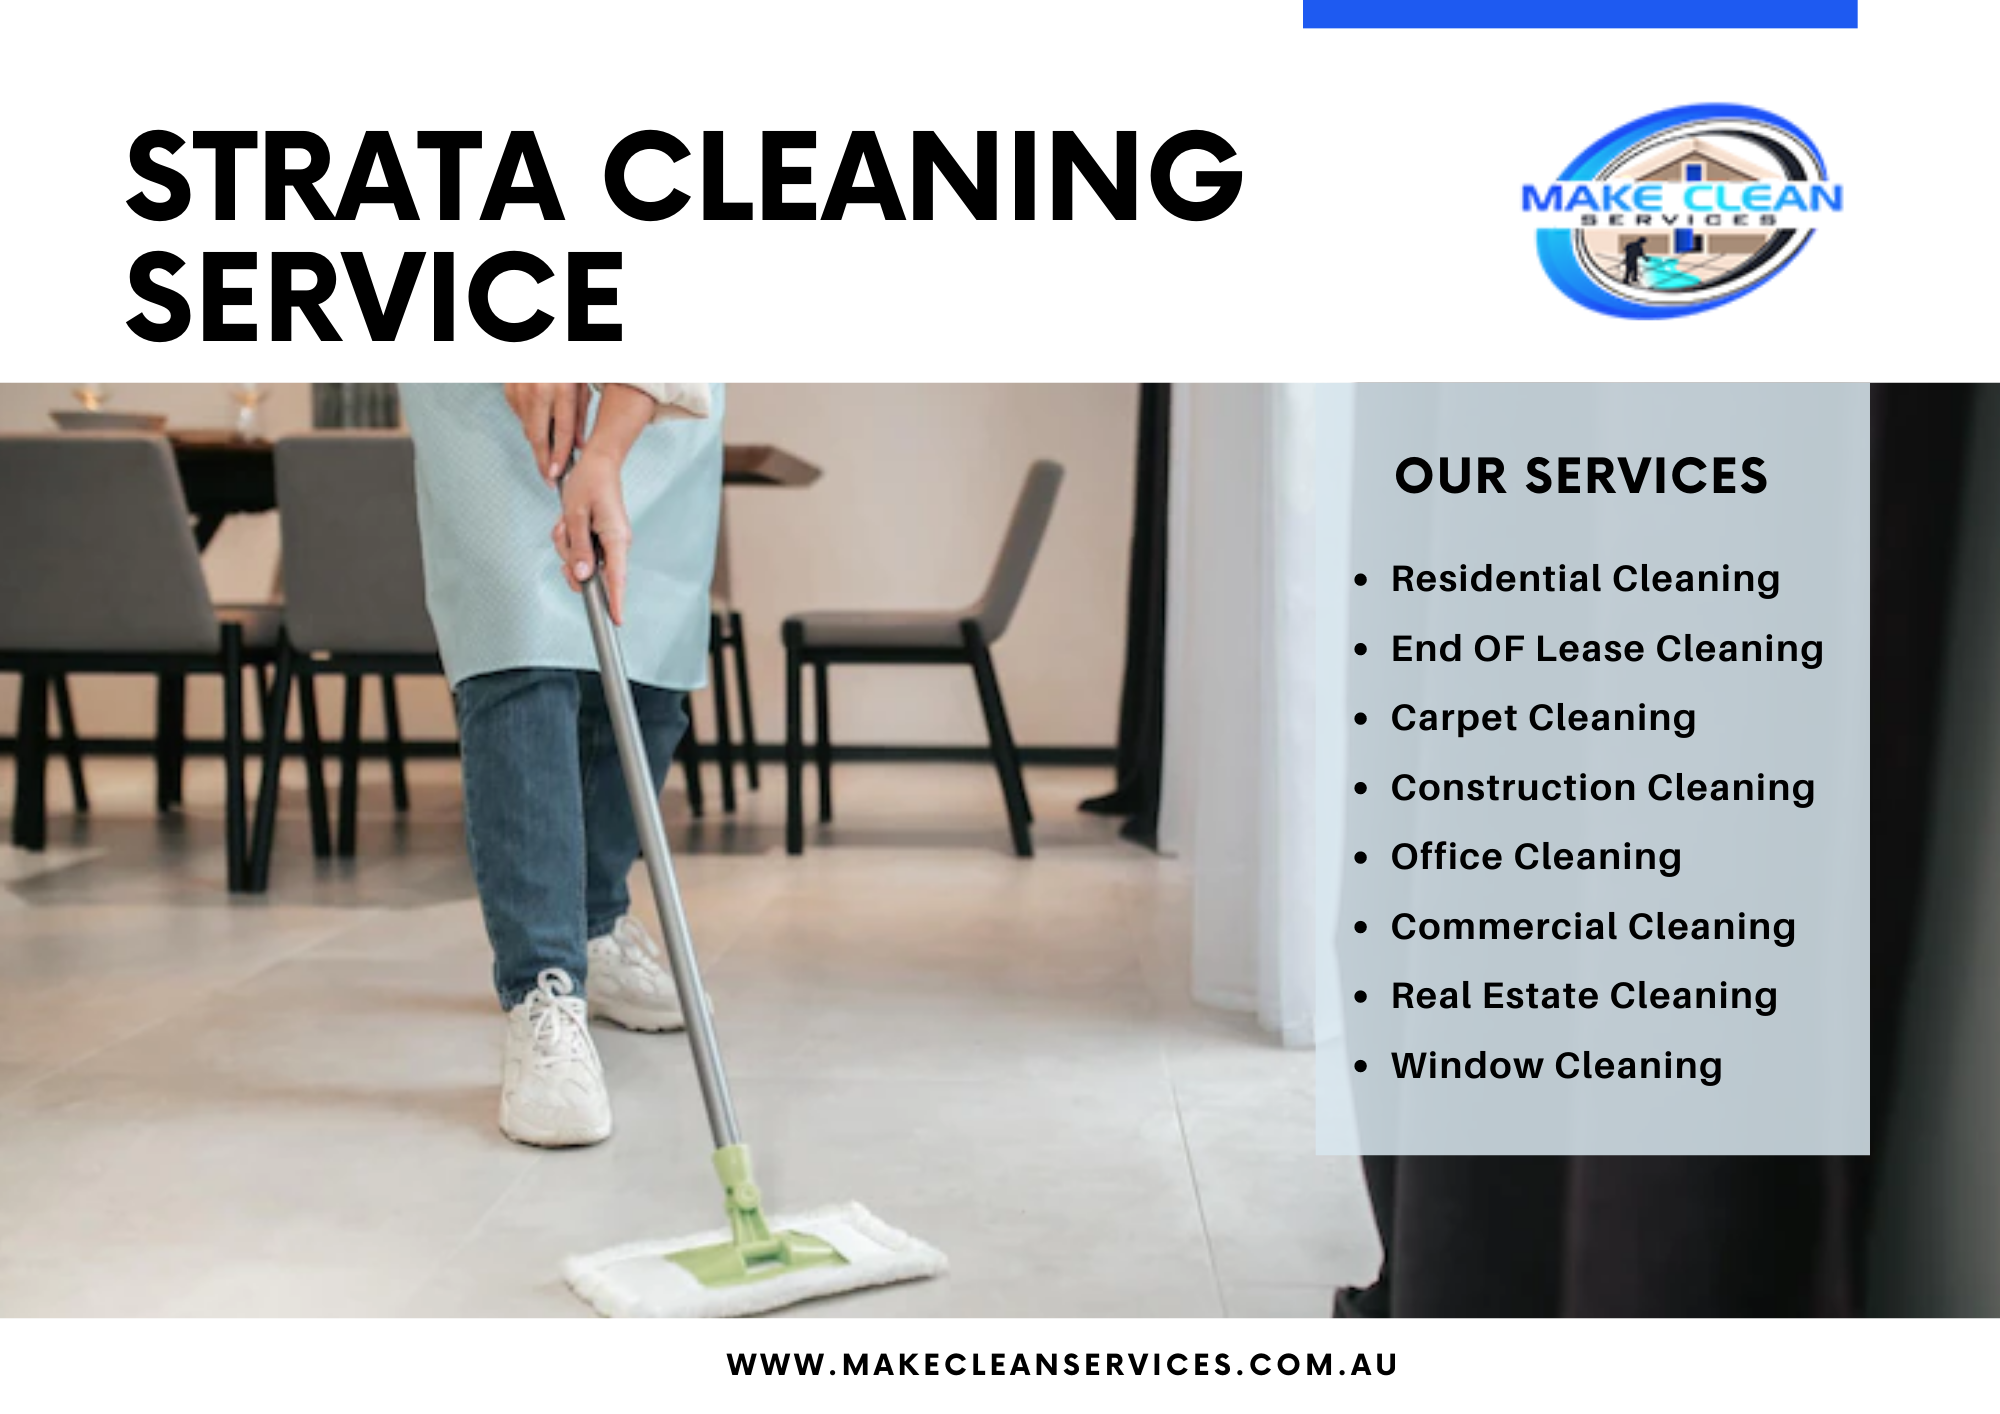 Strata Cleaning Service